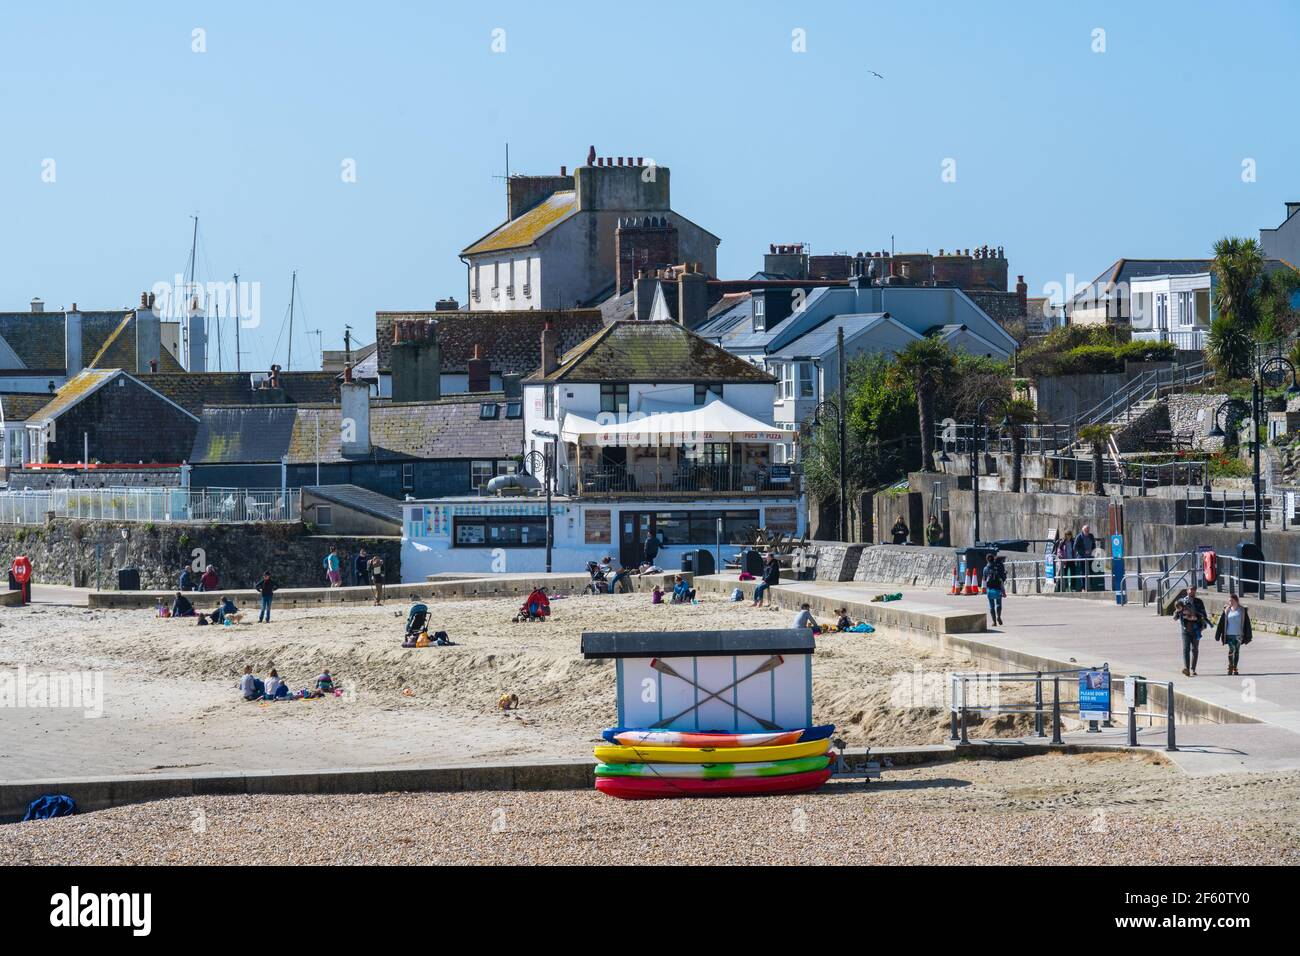 Lyme Regis, Dorset, UK. 29th Mar, 2021. UK Weather: The seaside resort of Lyme Regis basks in glorious warm spring sunshine as the coronavirus lockdown restrictions ease toay. Temperatures are set to soar with the south coast seeing sizzling conditions this week. Credit: Celia McMahon/Alamy Live News Stock Photo